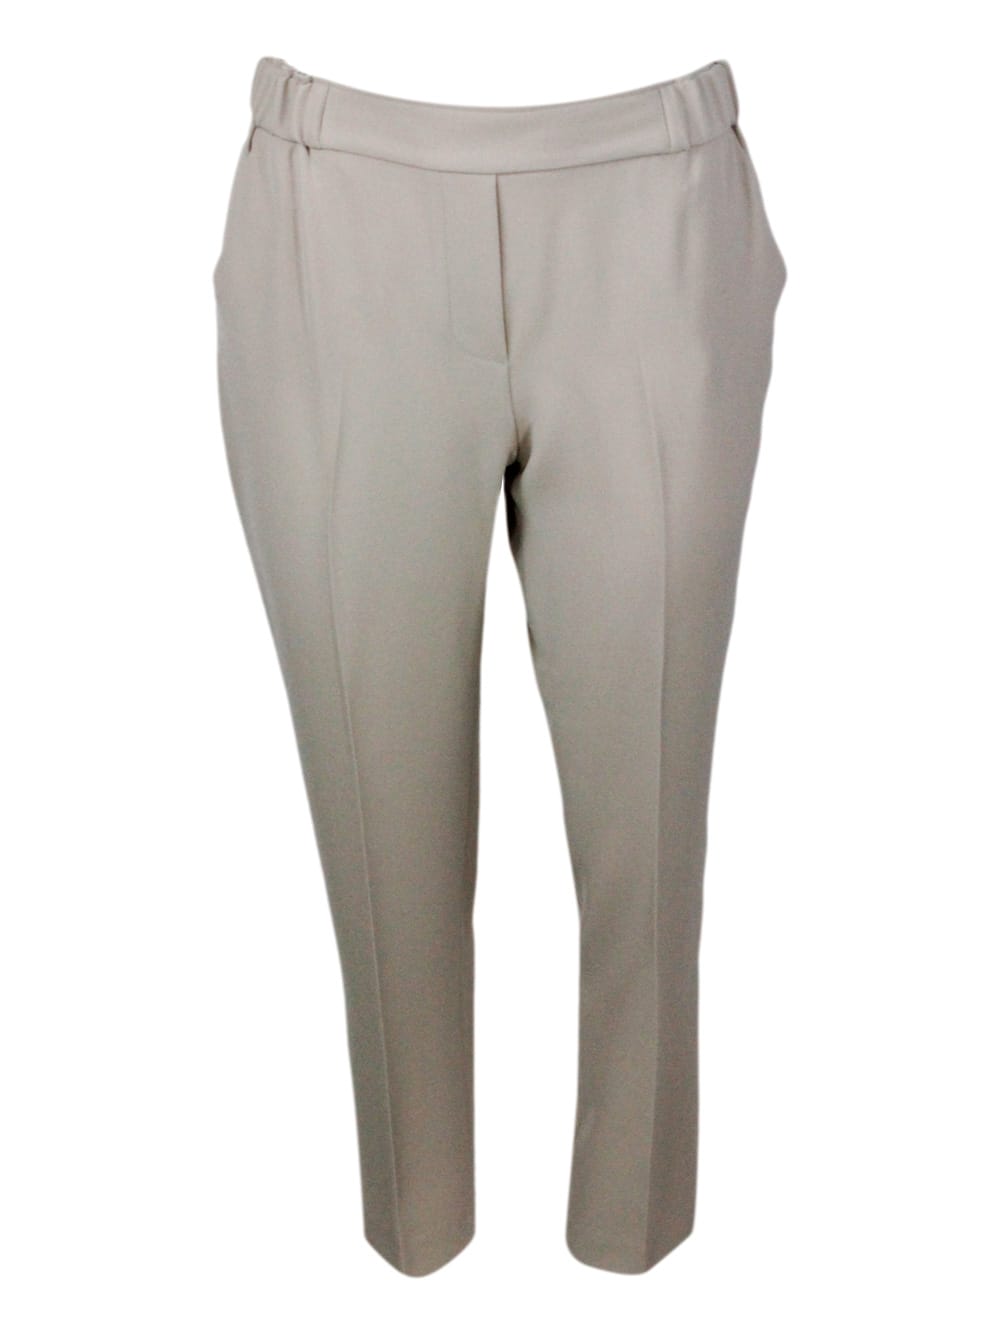 Jogging Trousers With Elastic Waist And Welt Pockets With A Cigarette Fit